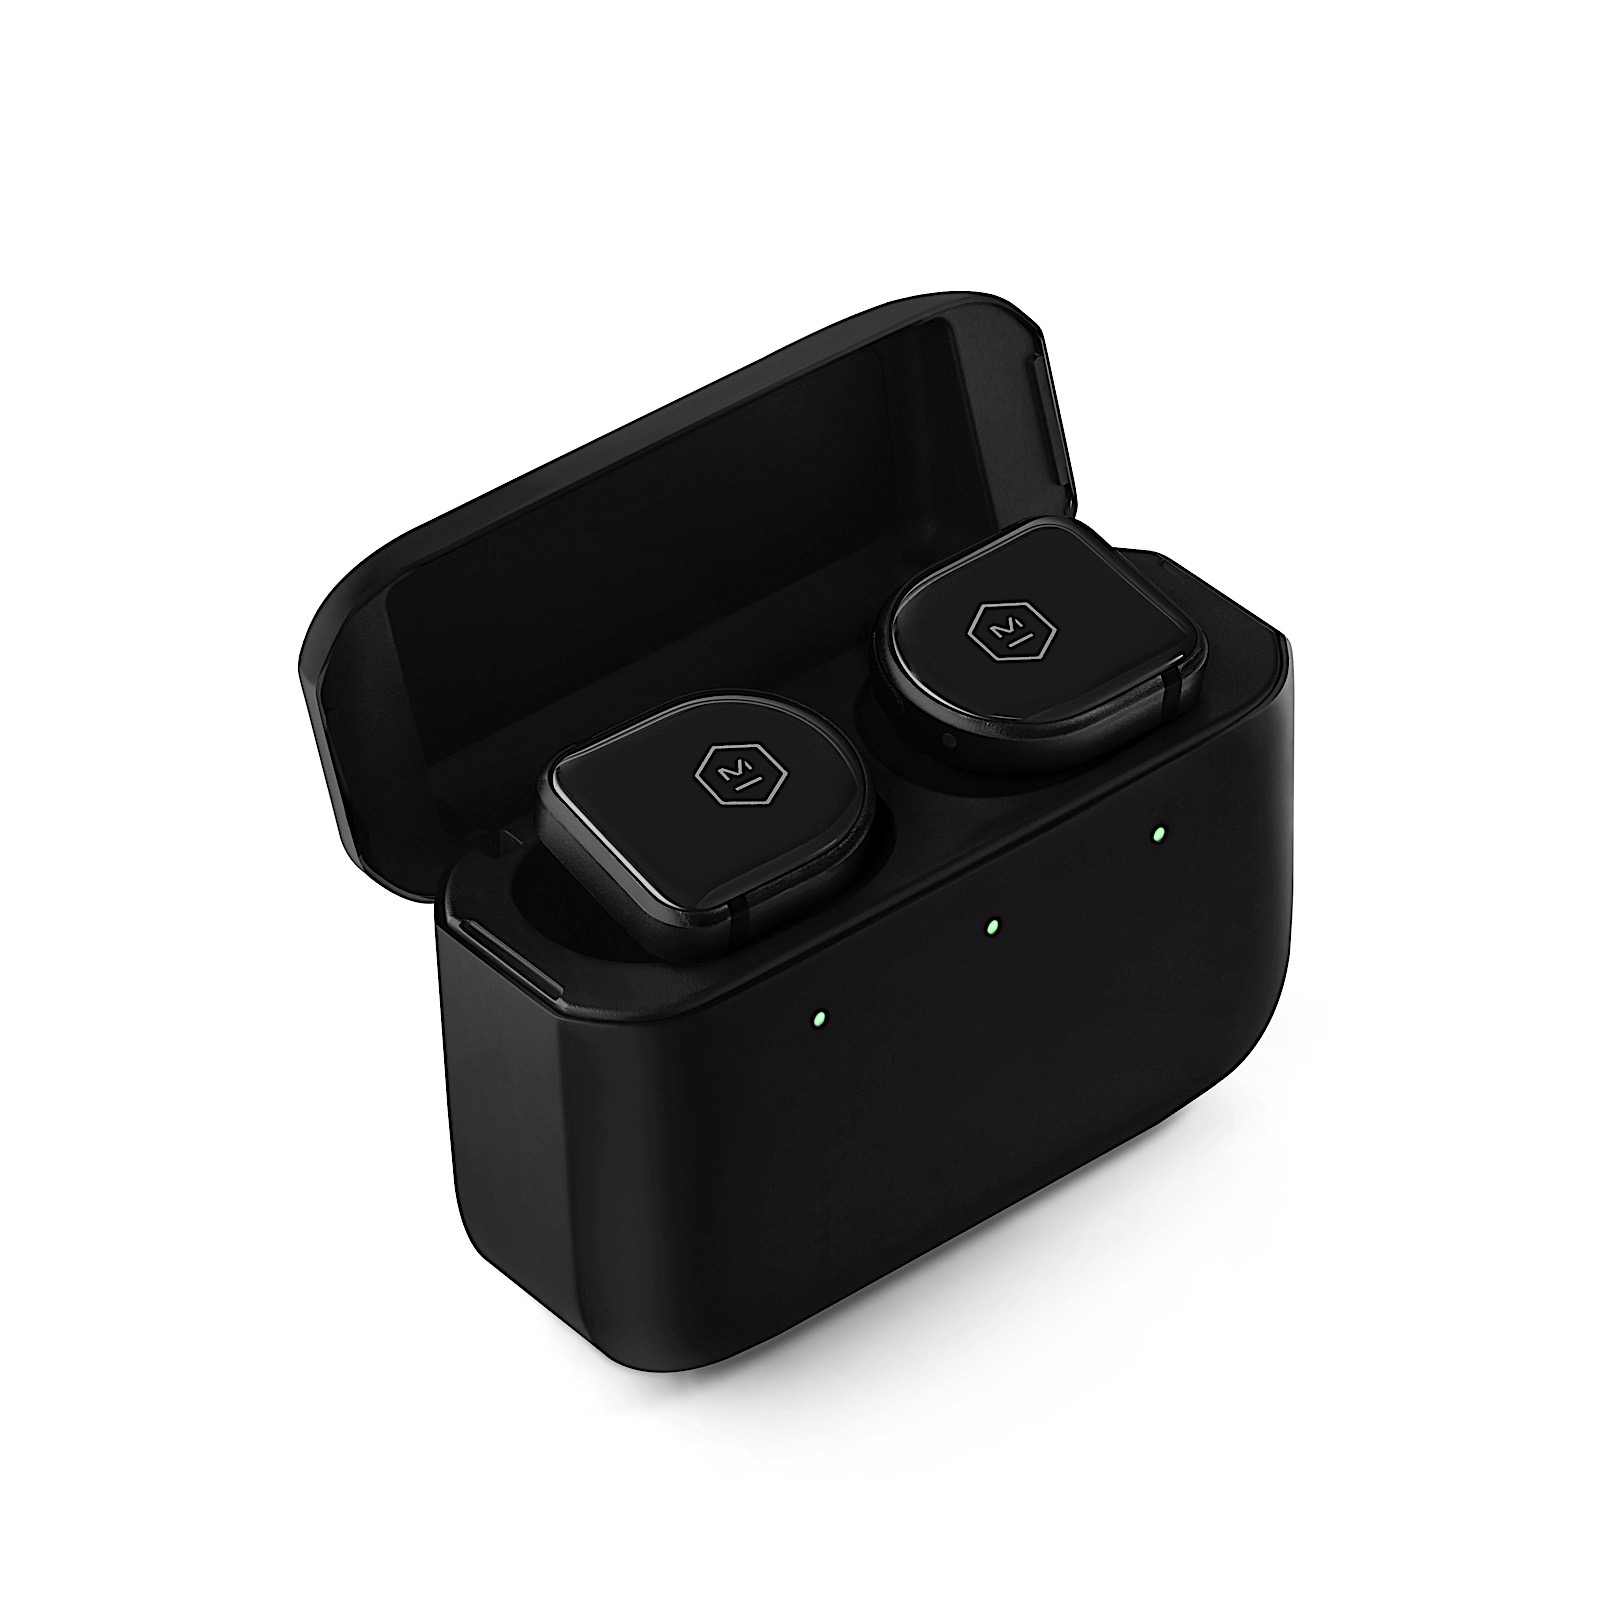 <p>Master & Dynamic's latest true wireless earbuds have a familiar design with new materials, larger drivers and more robust active noise cancellation.</p>
